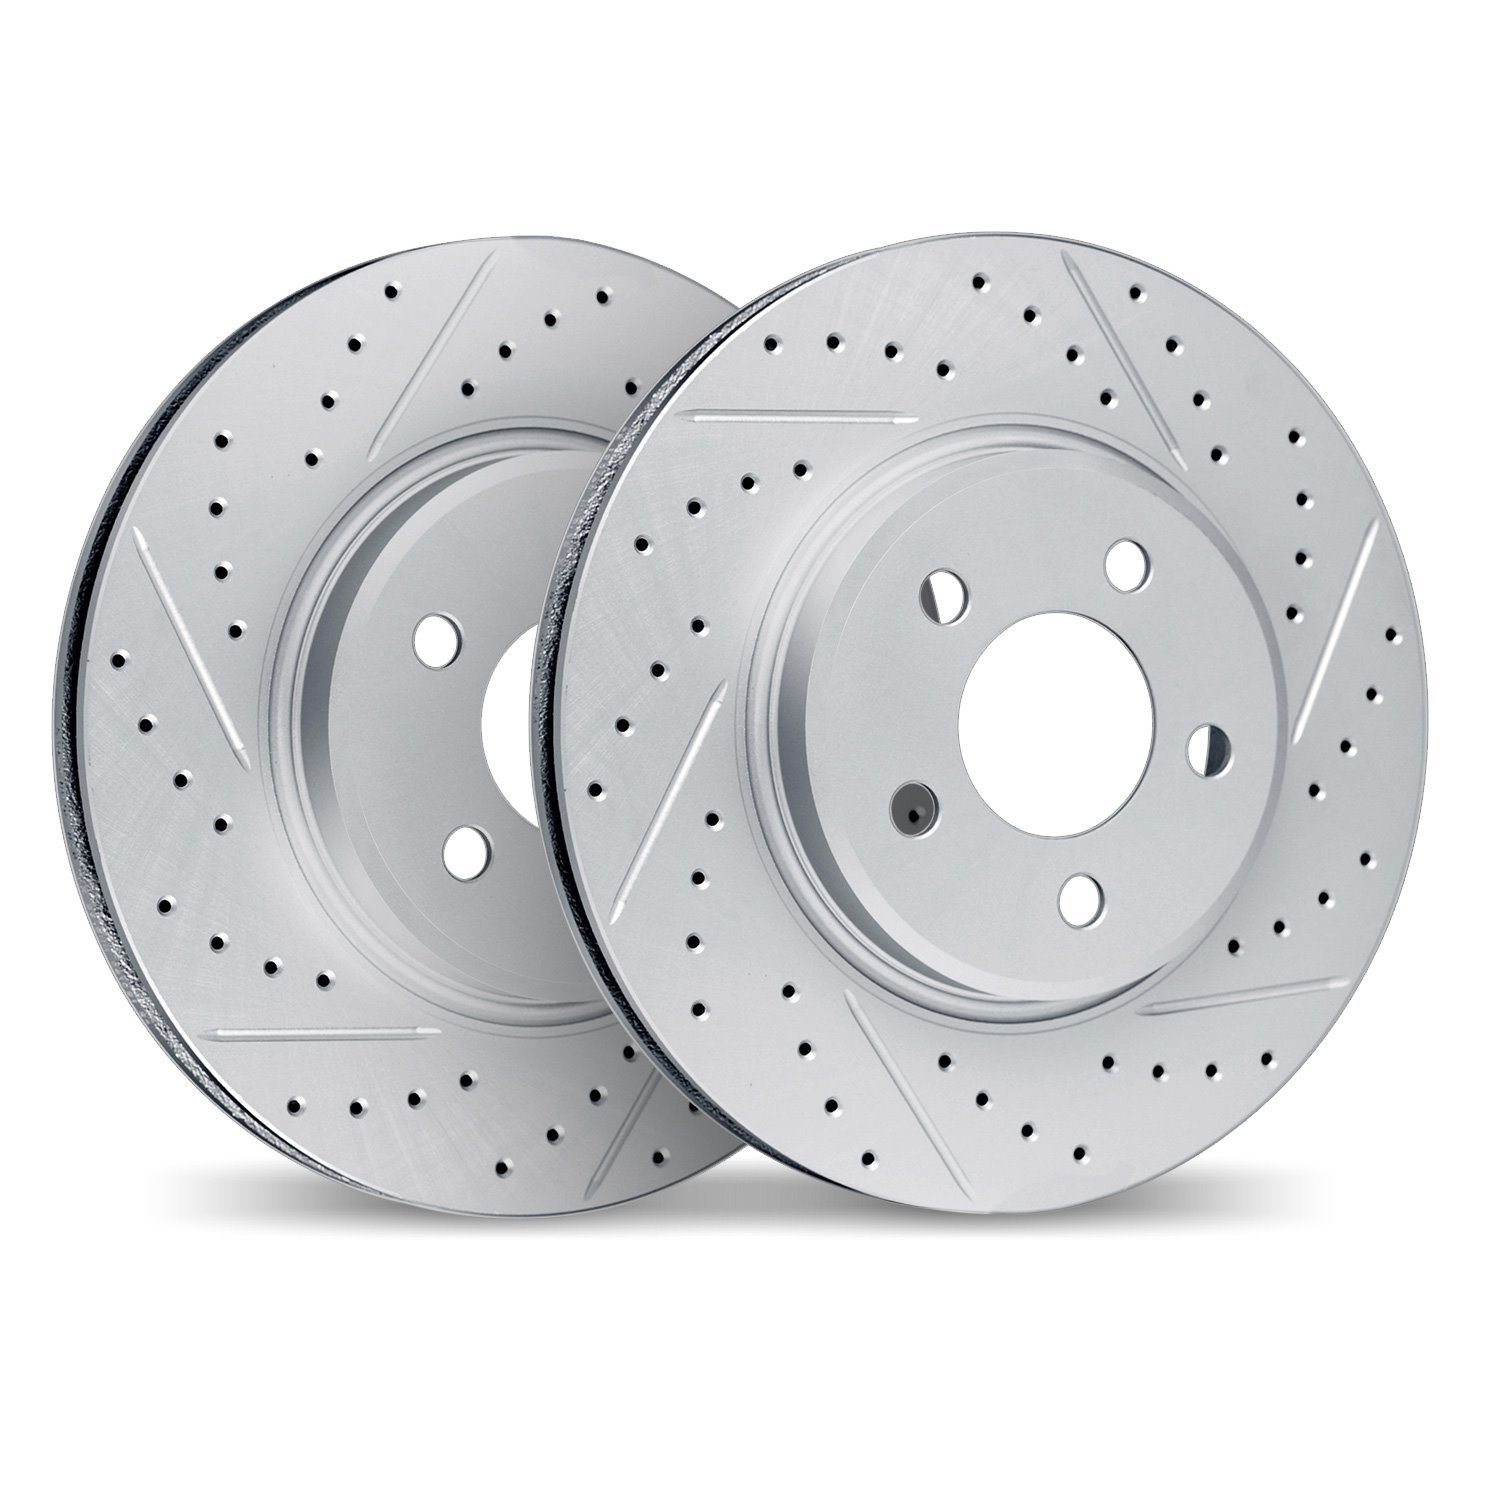 2002-80009 Geoperformance Drilled/Slotted Brake Rotors, Fits Select Ford/Lincoln/Mercury/Mazda, Position: Front